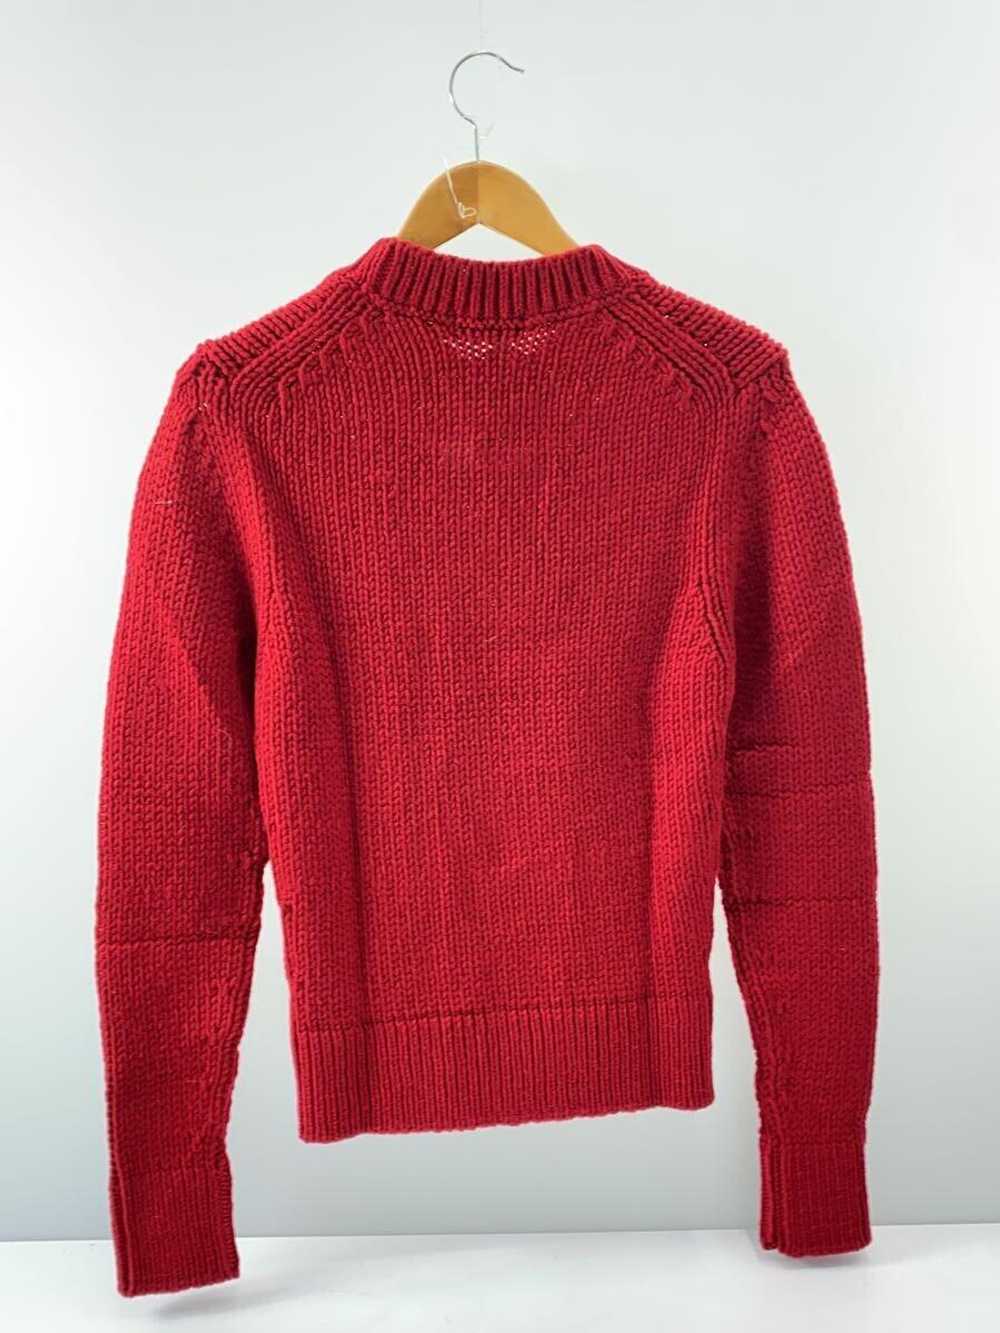 Men's Dolce & Gabbana Sweater Thick/Wool/Red - image 2